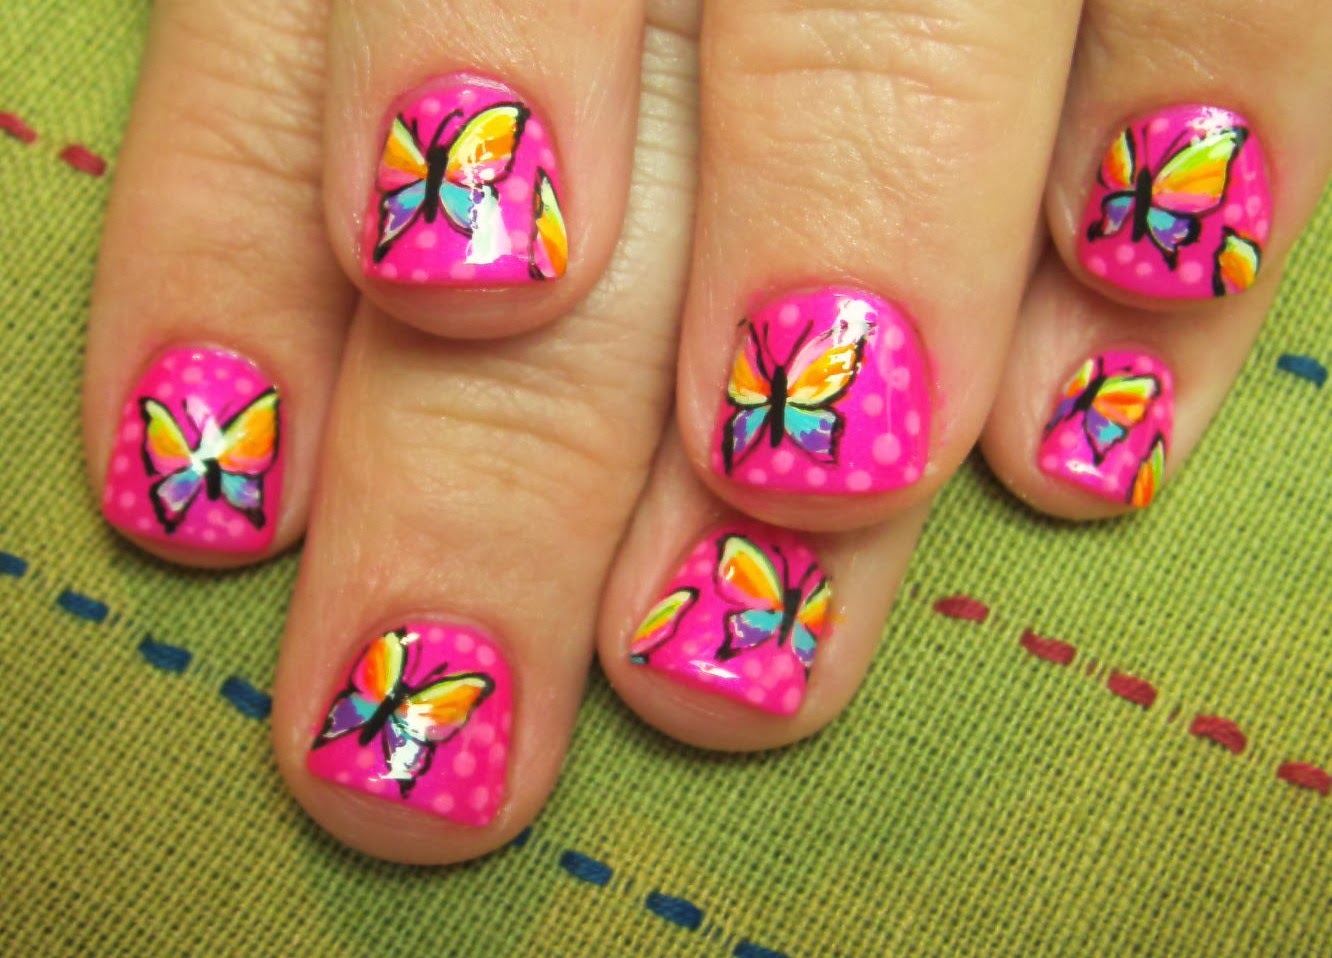 Nail Art with Butterflies - wide 4